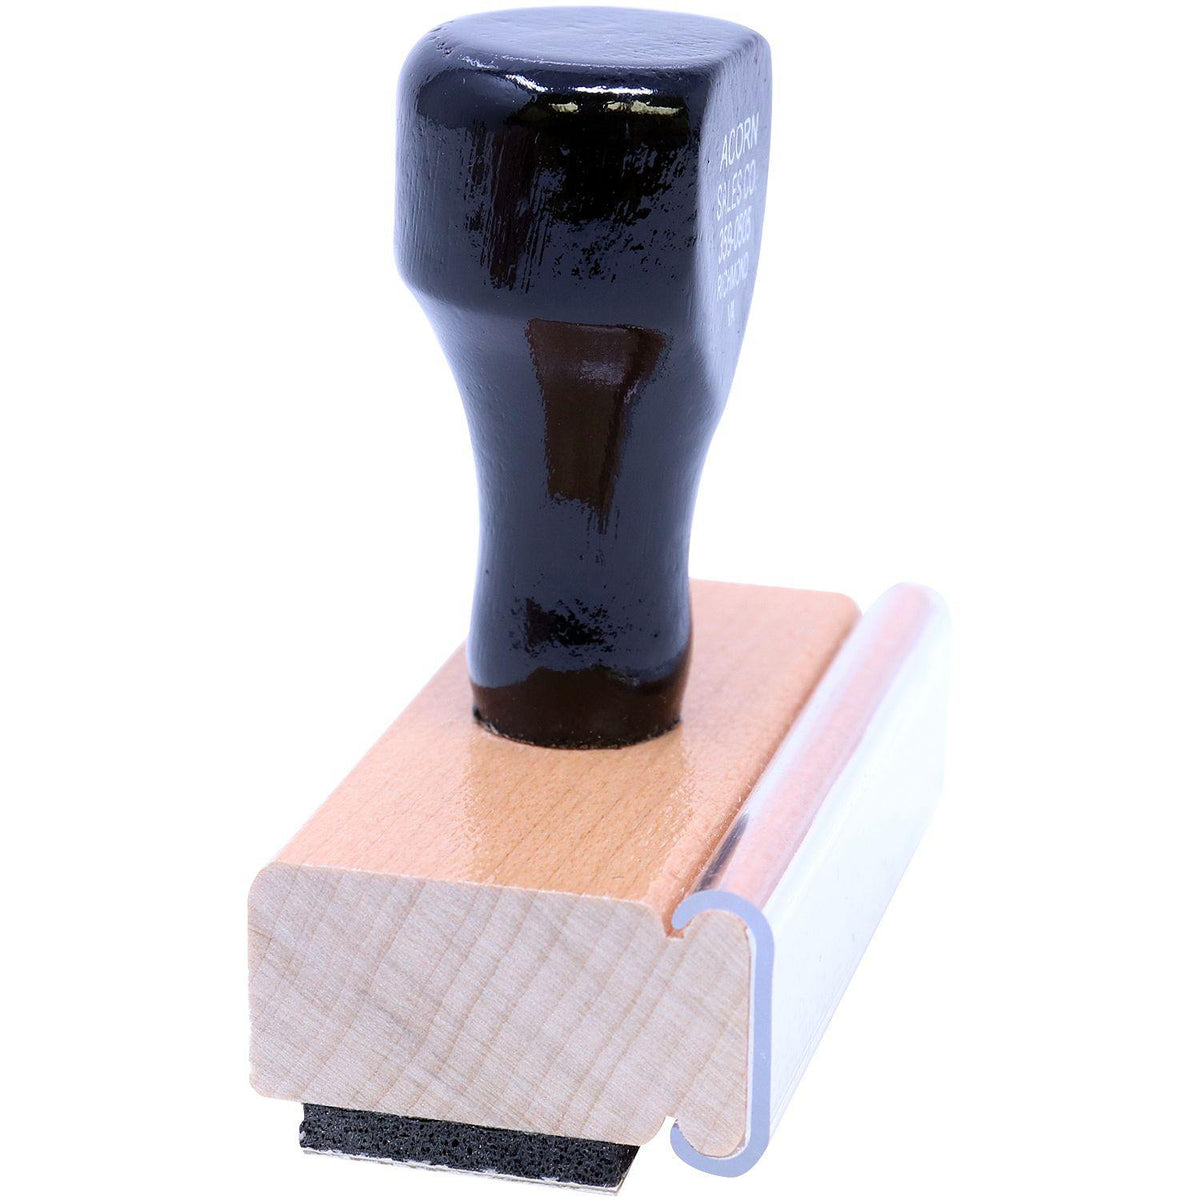 Side View of Large Restricted Delivery Rubber Stamp at an Angle